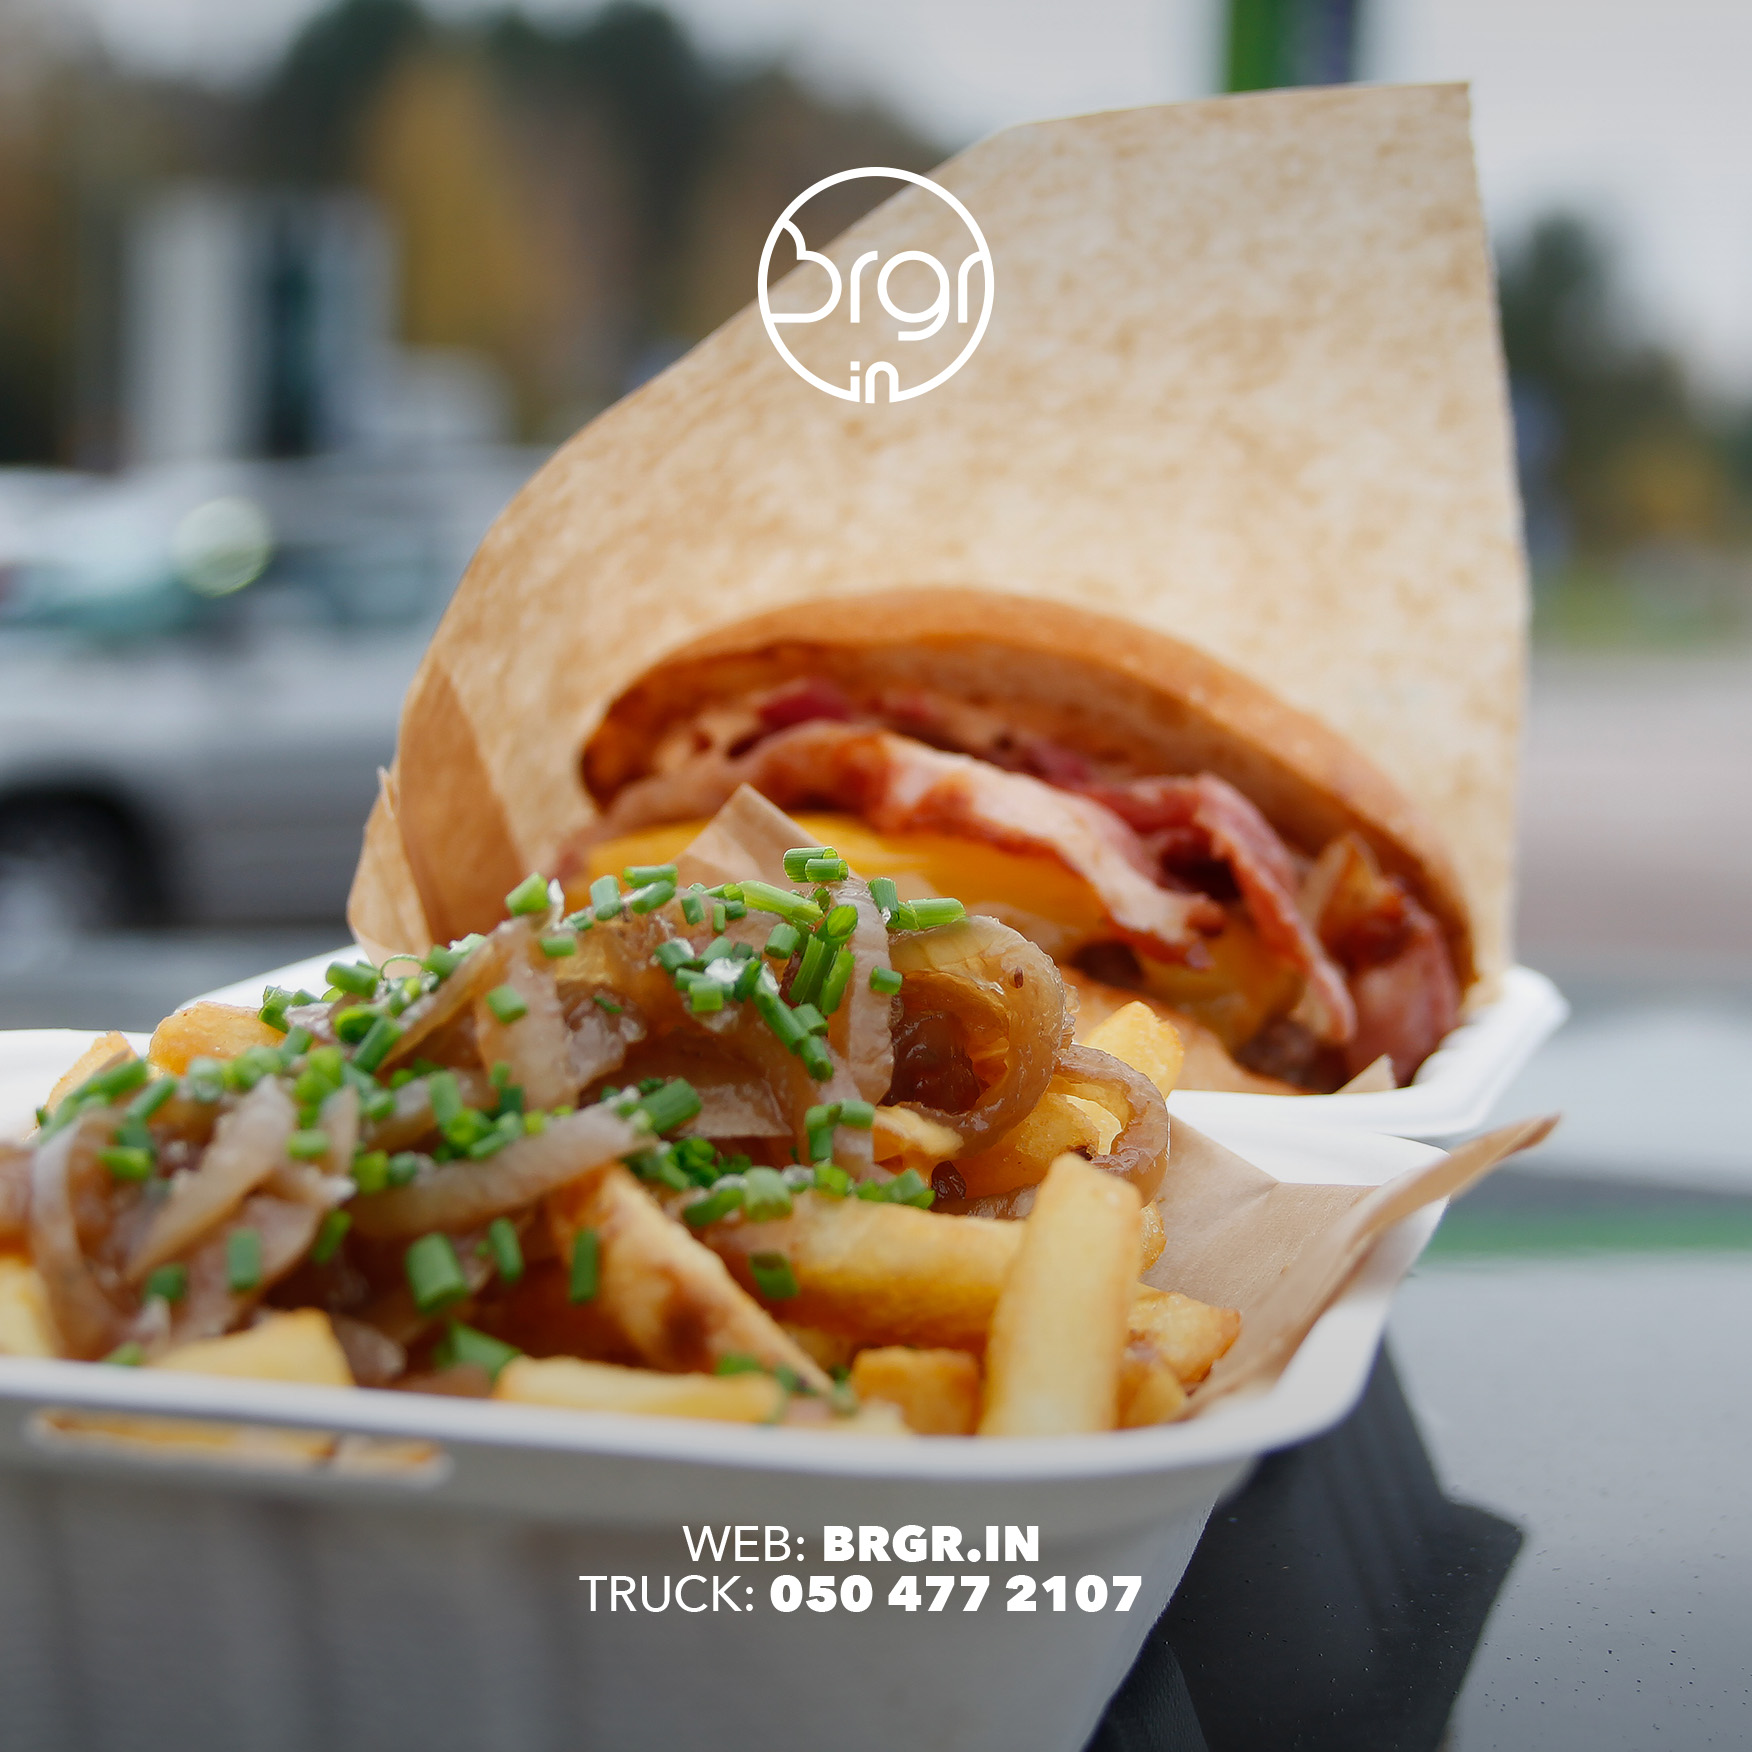 Brgr.in coming to the TSTOS event!